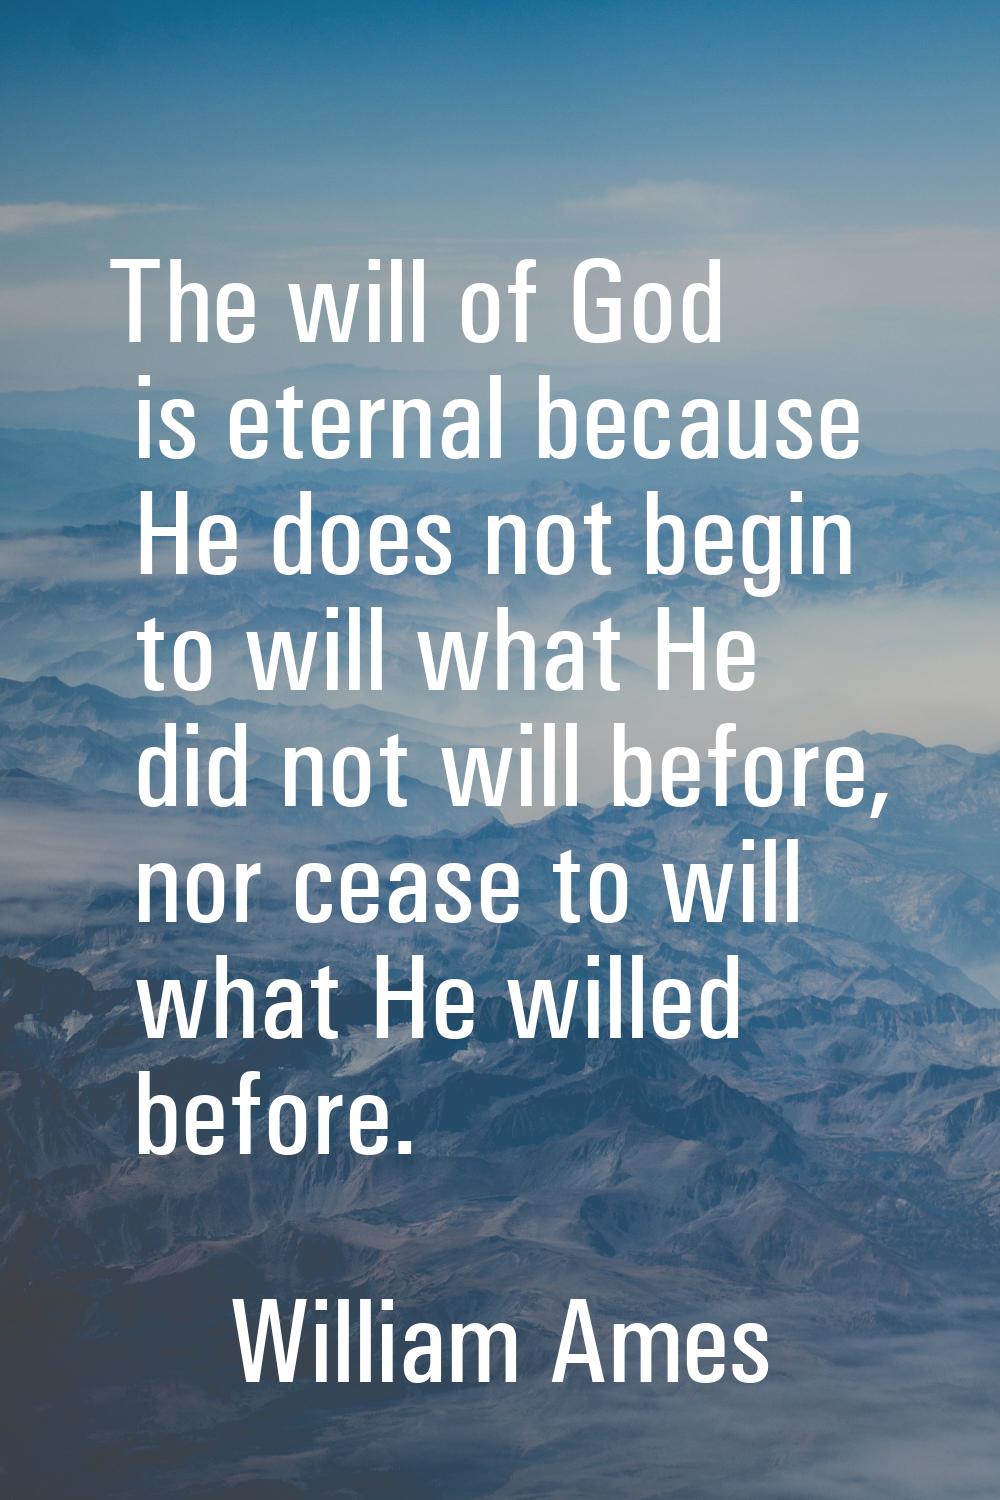 The will of God is eternal because He does not begin to will what He did not will before, nor cease